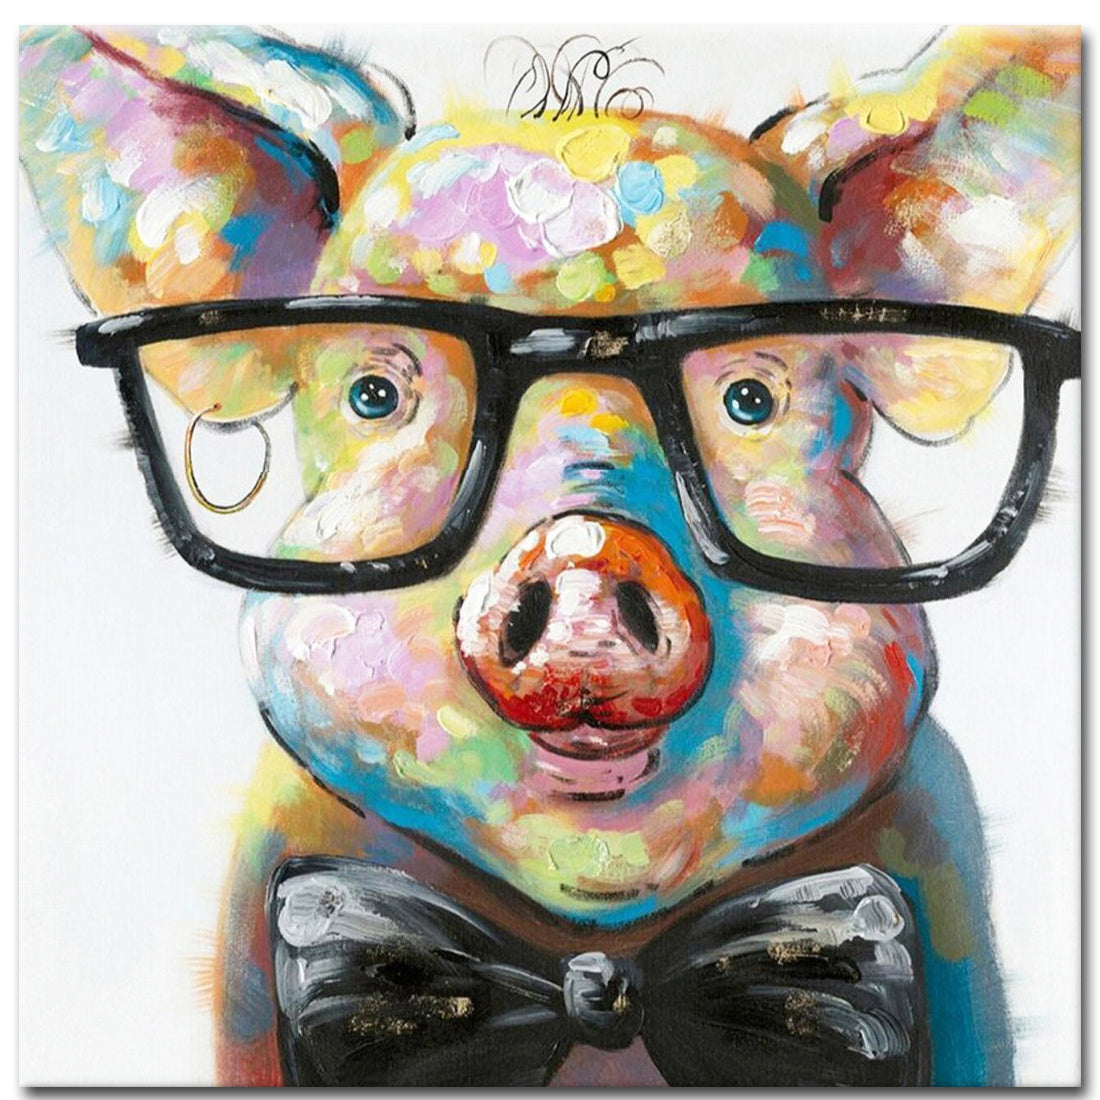 Top Selling Handmade Abstract Oil Painting Wall Art Modern Minimalist Pet Pig Canvas Home Decor For Living Room Bedroom No Frame